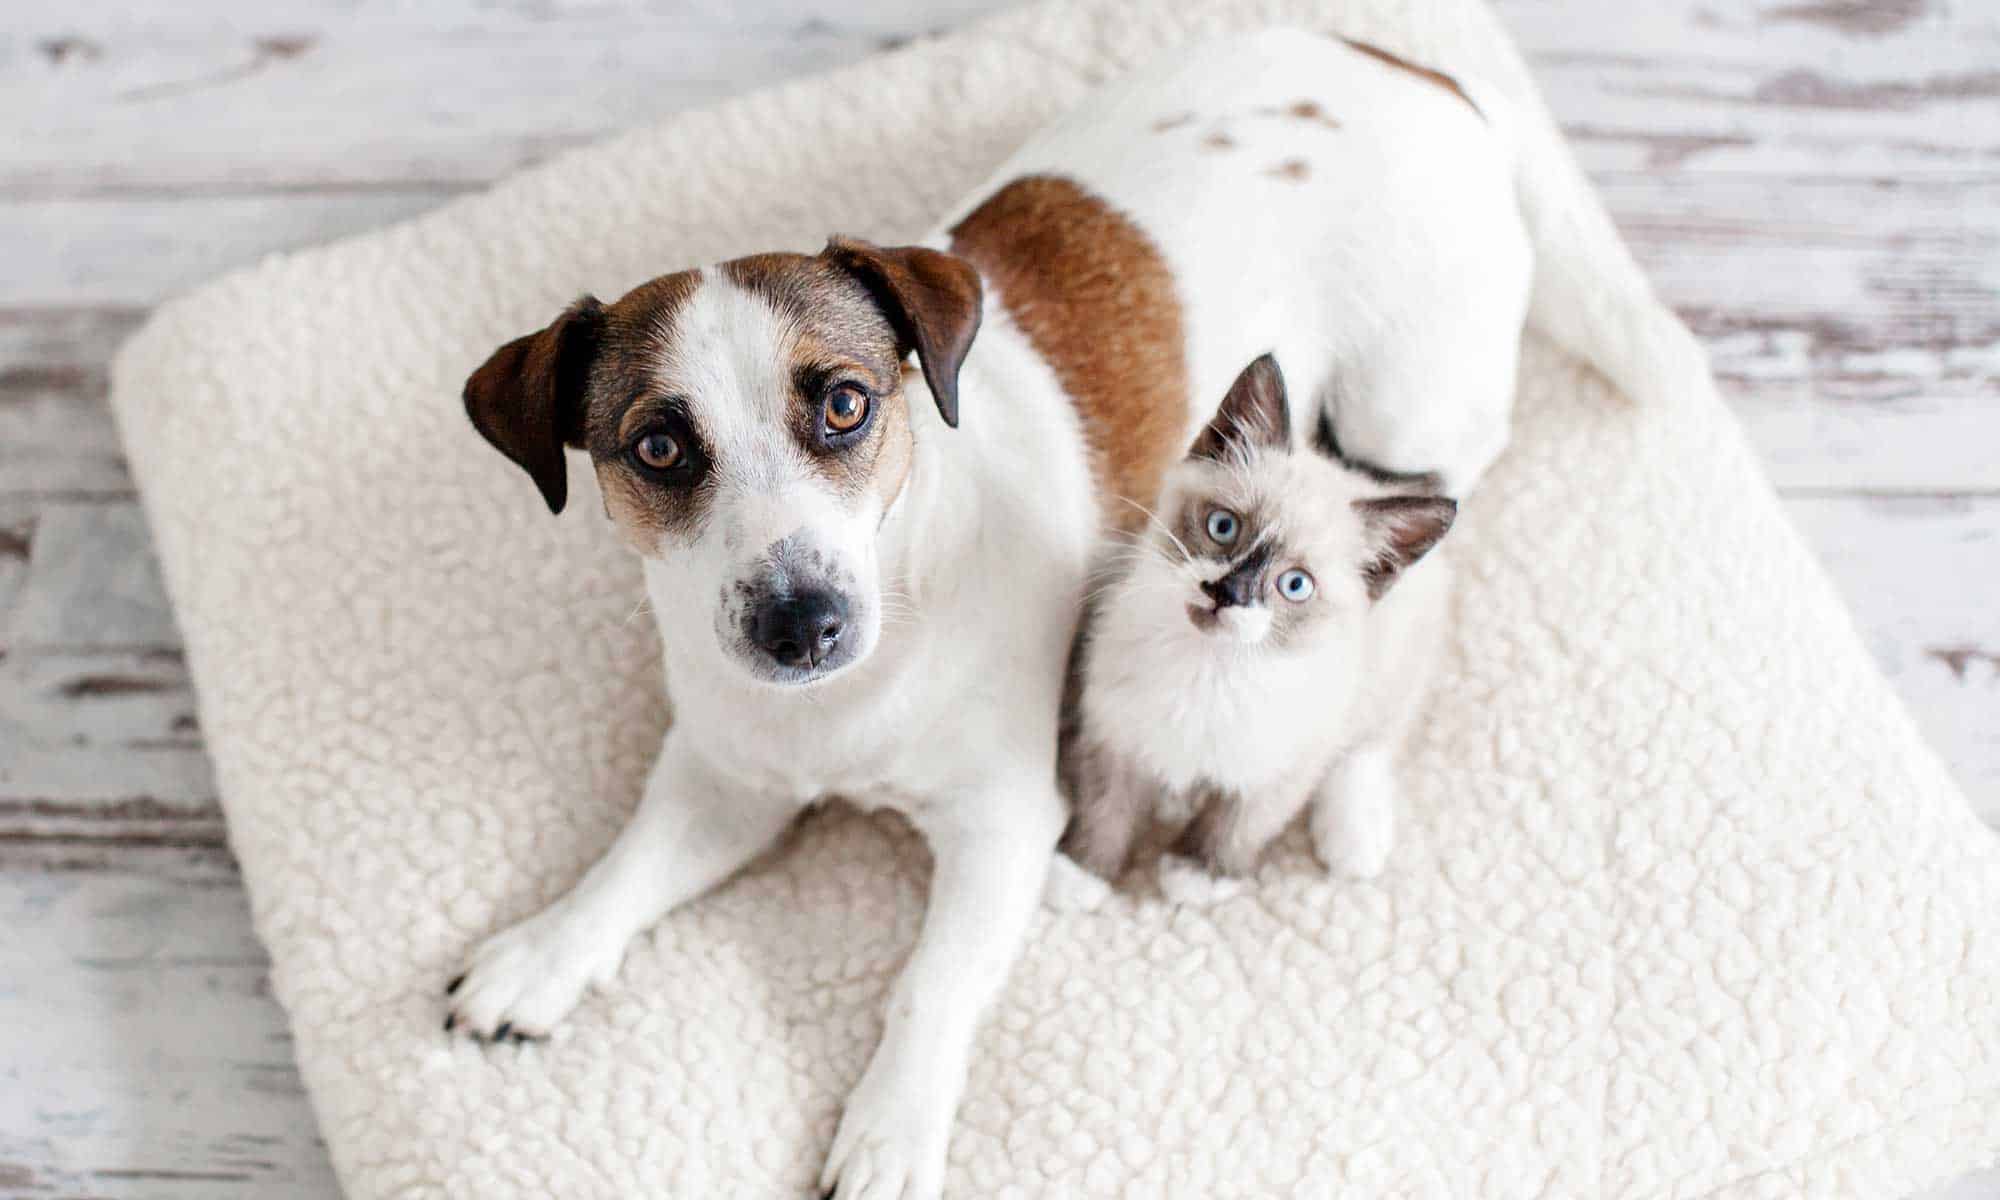 A dog and kitten sitting on a white blanket